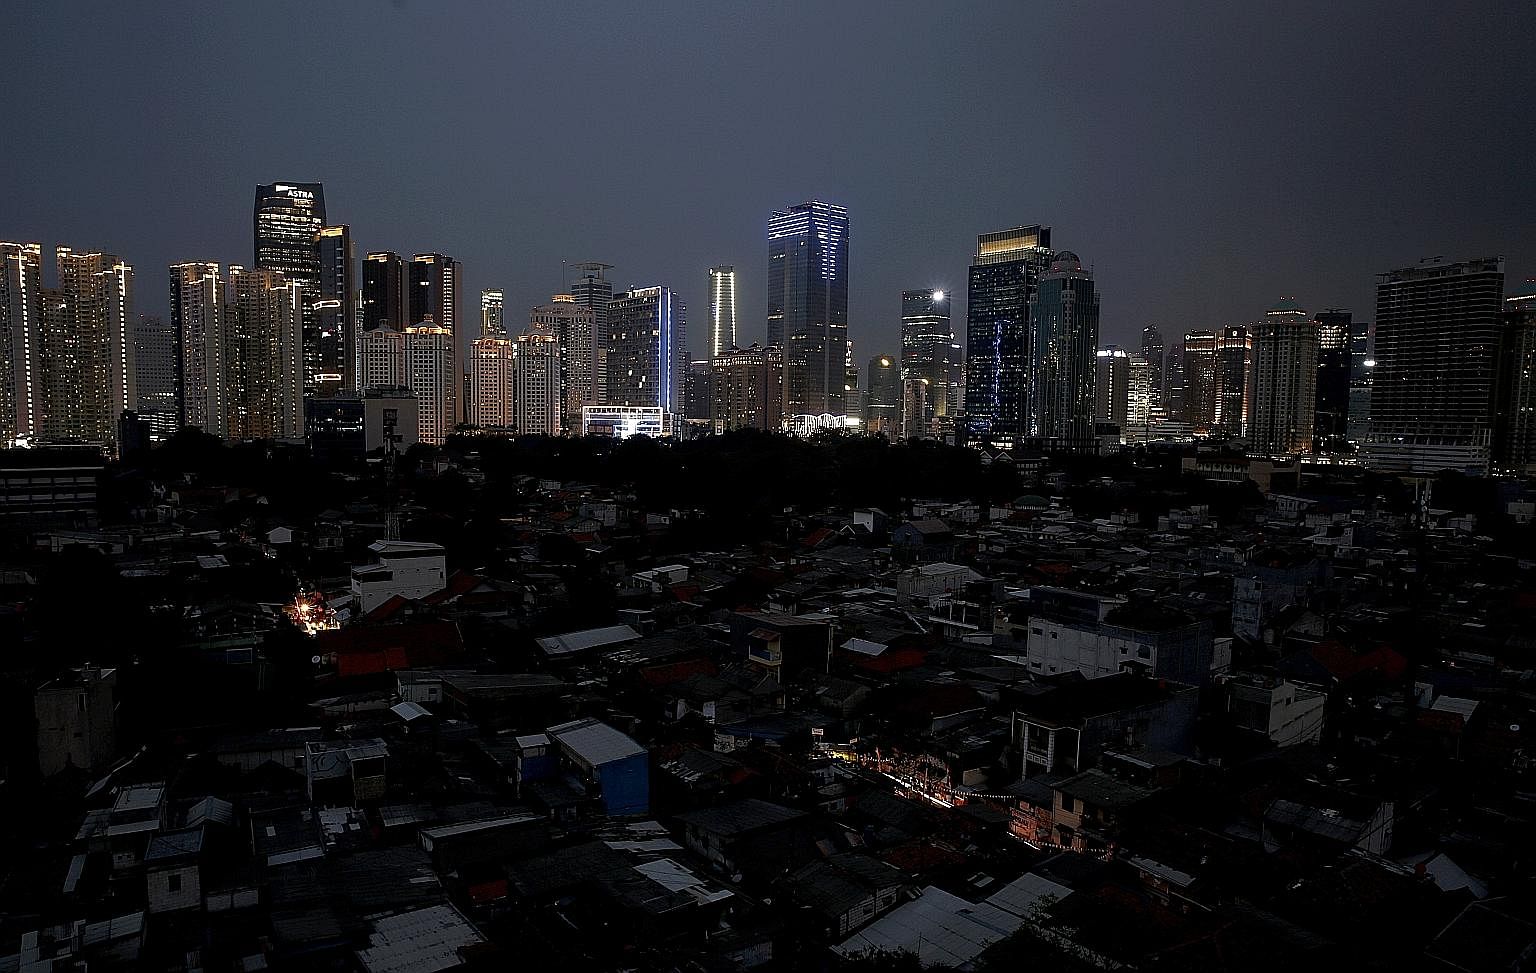 A major power outage hit Jakarta and other areas in Indonesia yesterday. The Indonesian capital, as well as parts of West Java and Central Java, experienced a major blackout affecting tens of millions of people. The mass rapid transit system was also